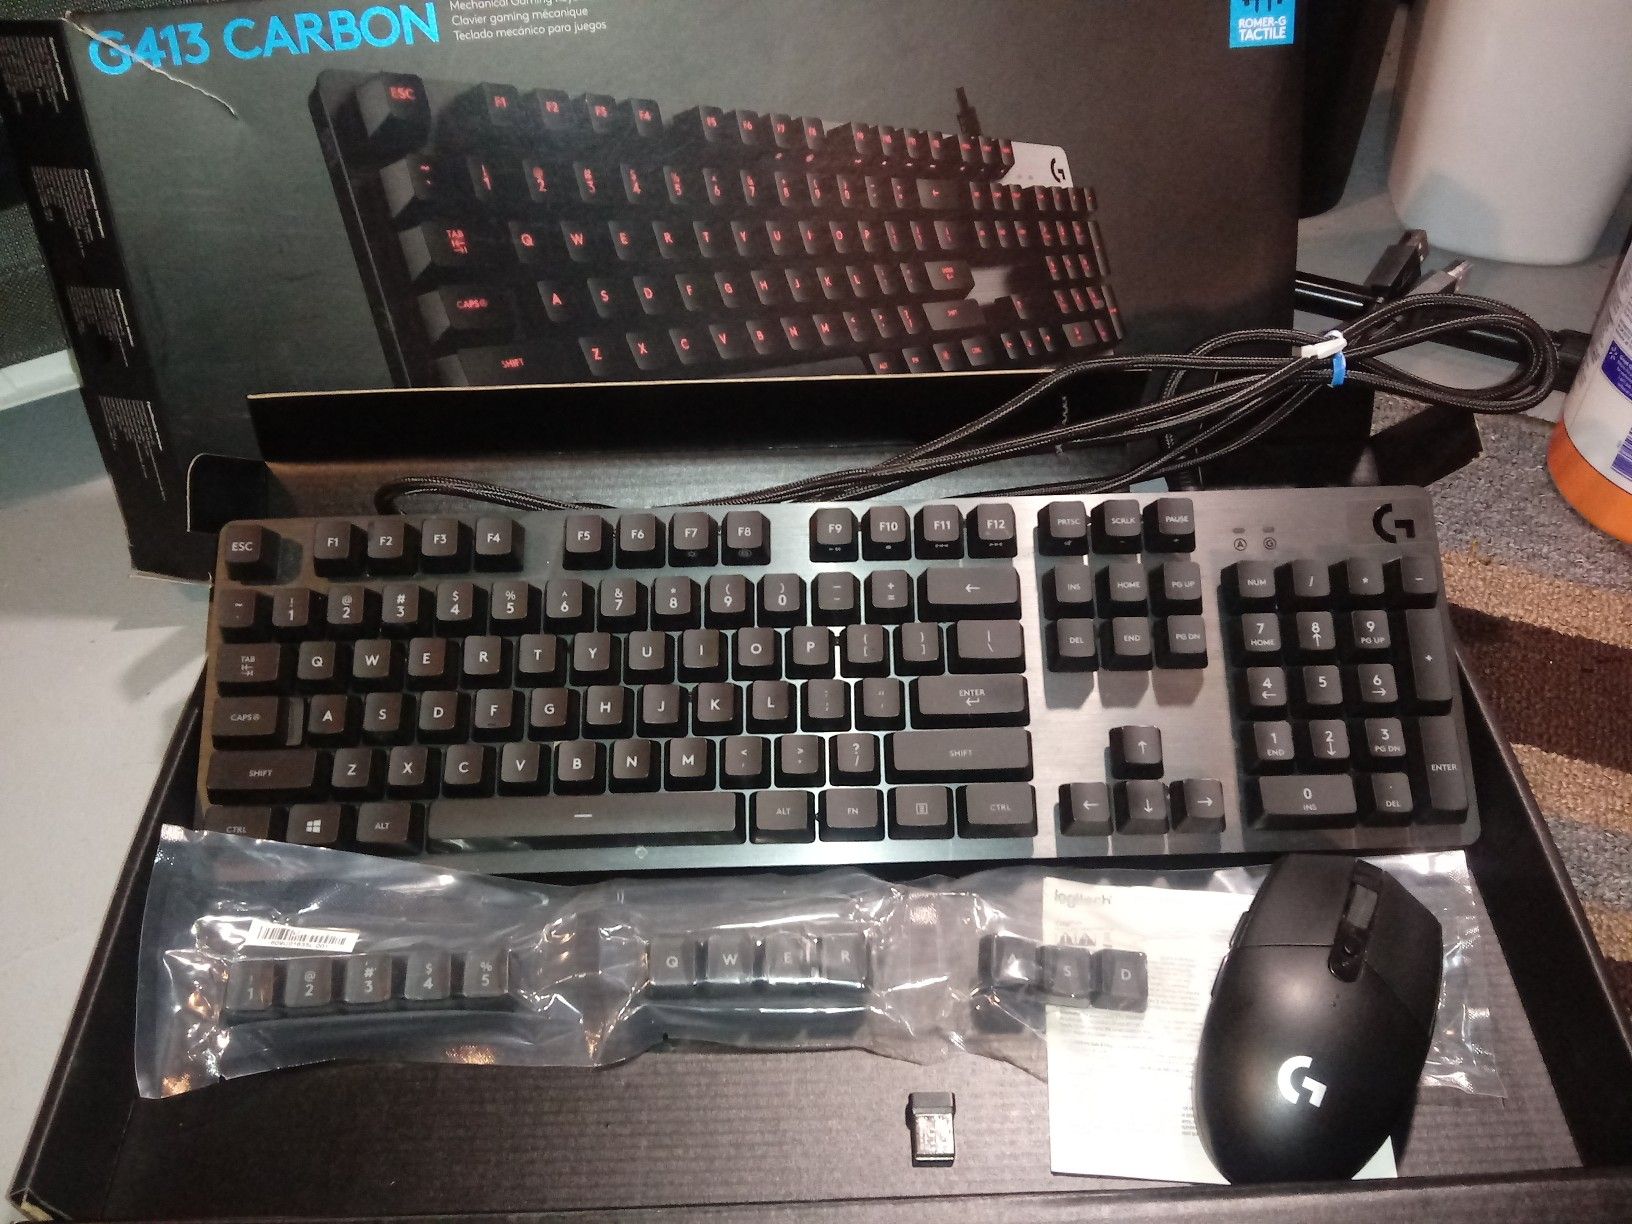 Logitech G413 Carbon Mechanical Keyboard and G305 Lightning Mouse Combo